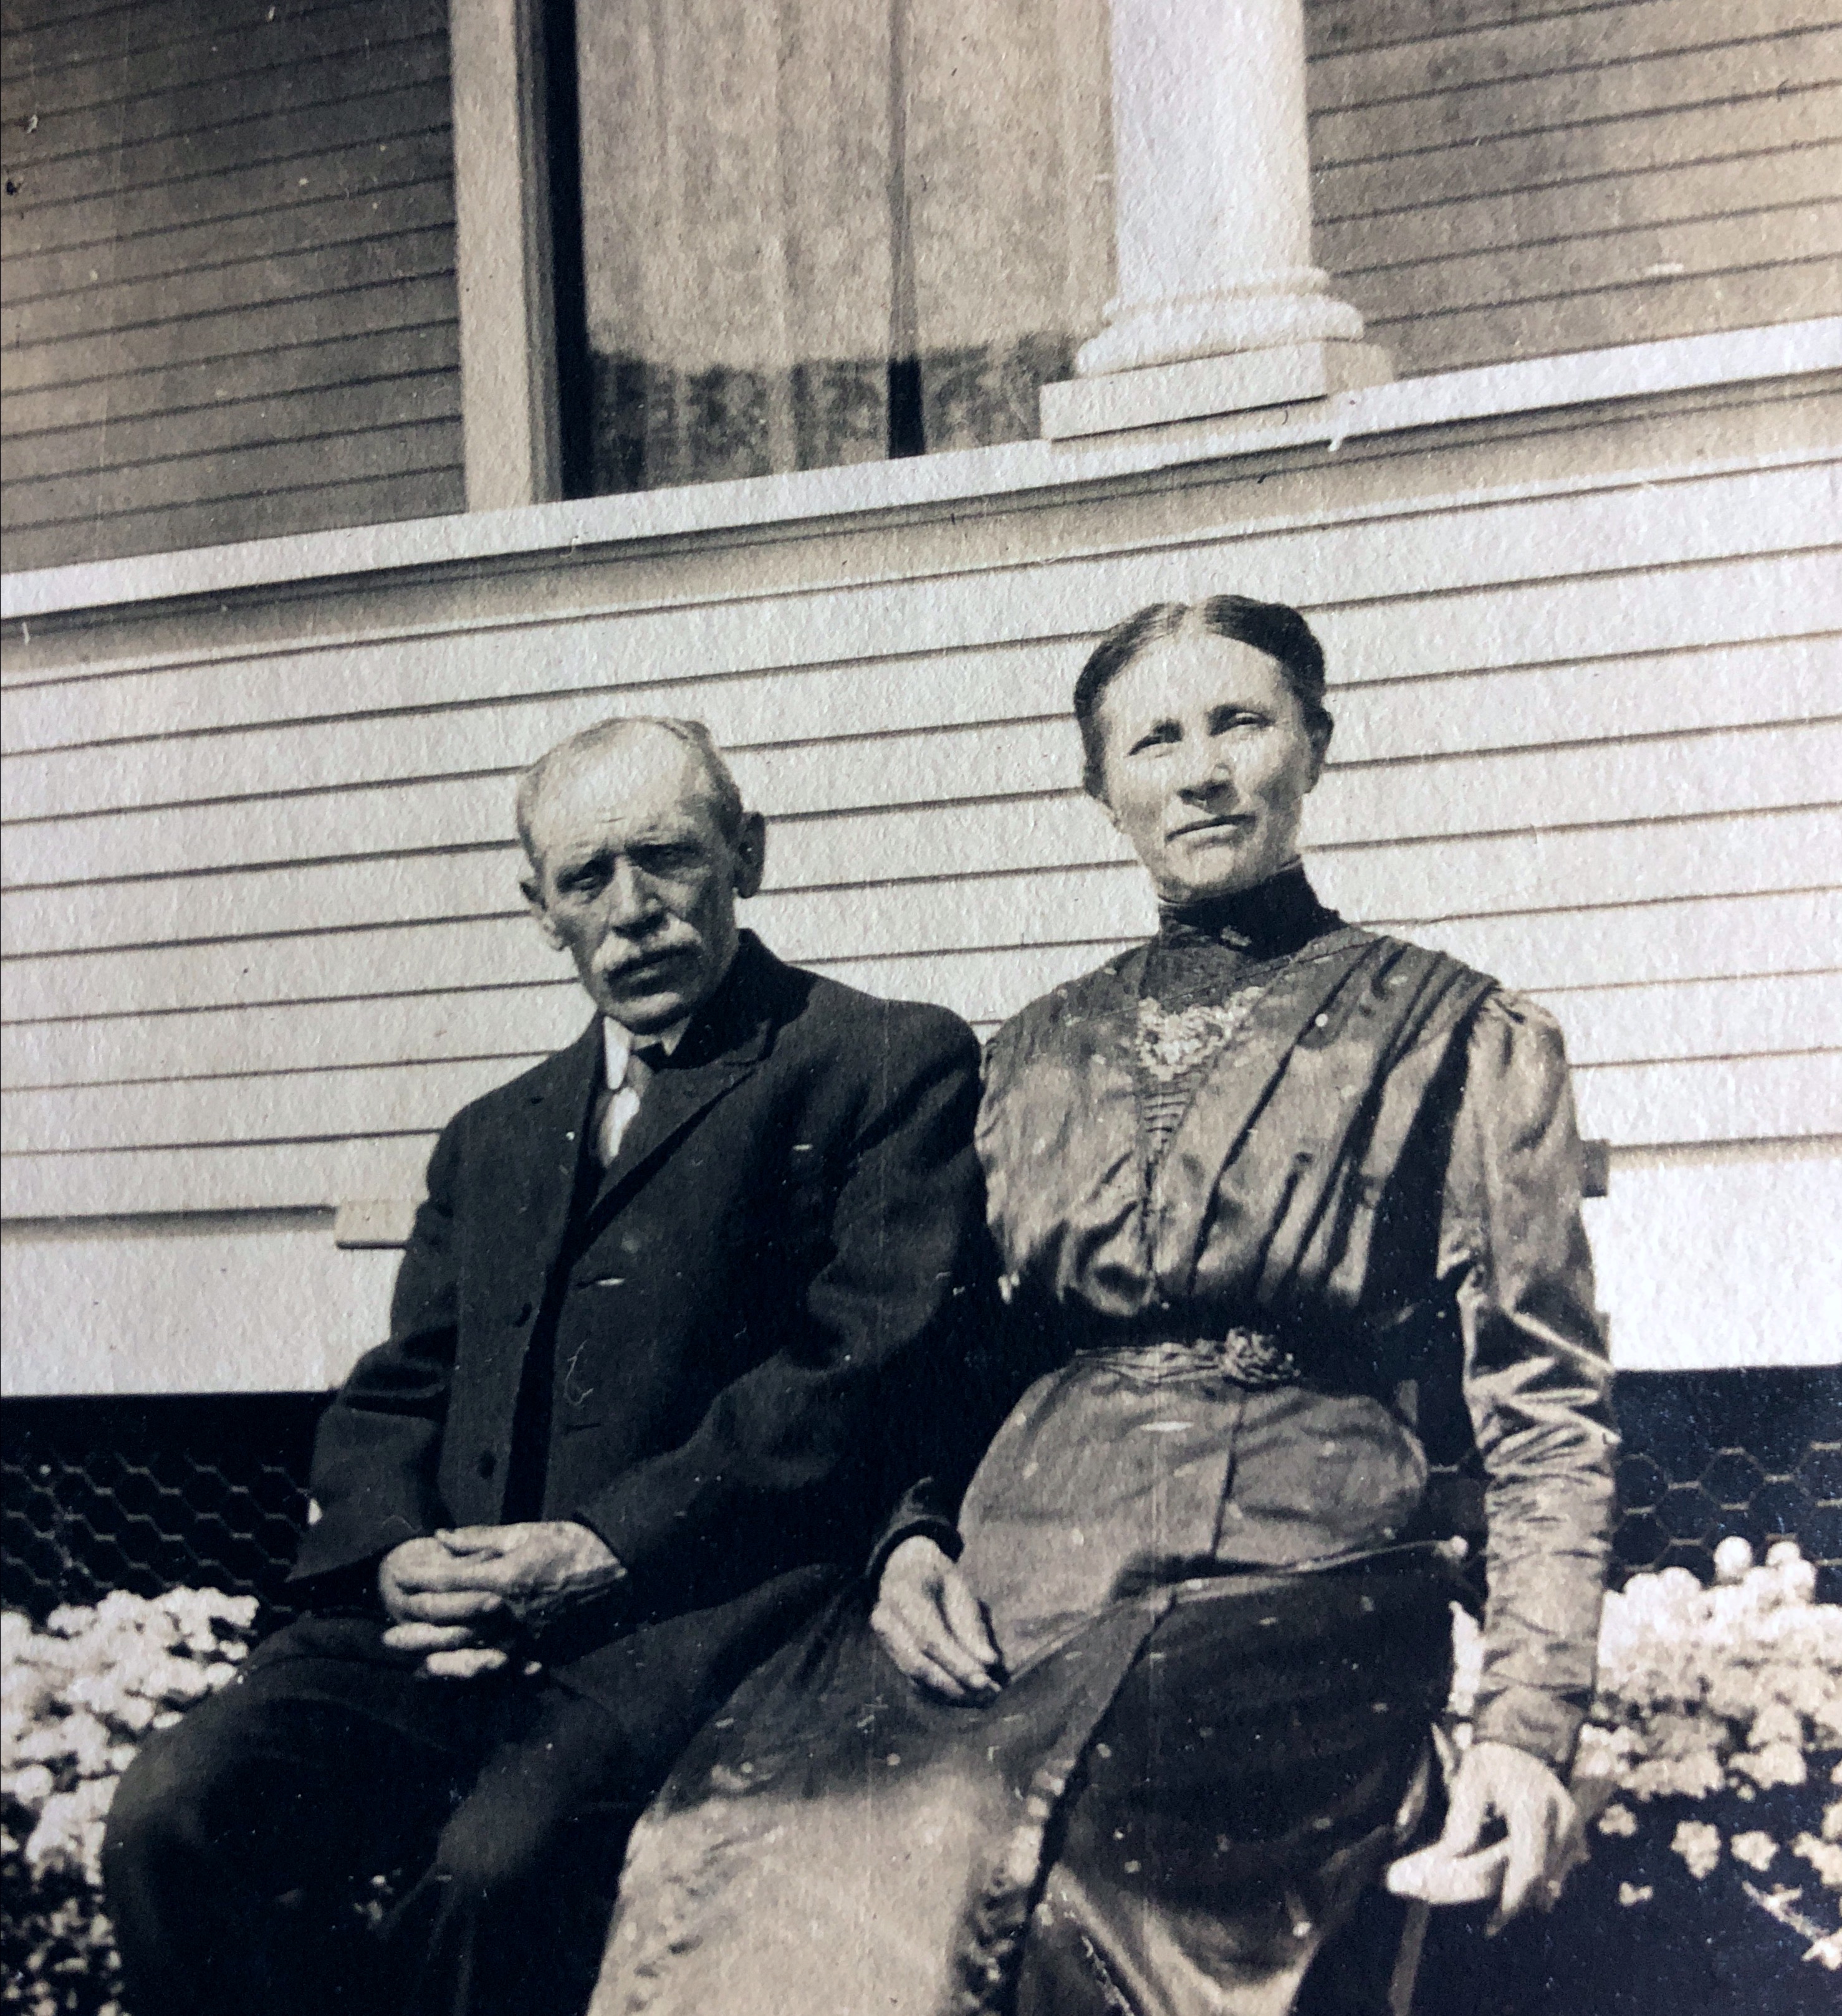 My great great grandparents outside the come of my great grandparents circa Summer, 1913